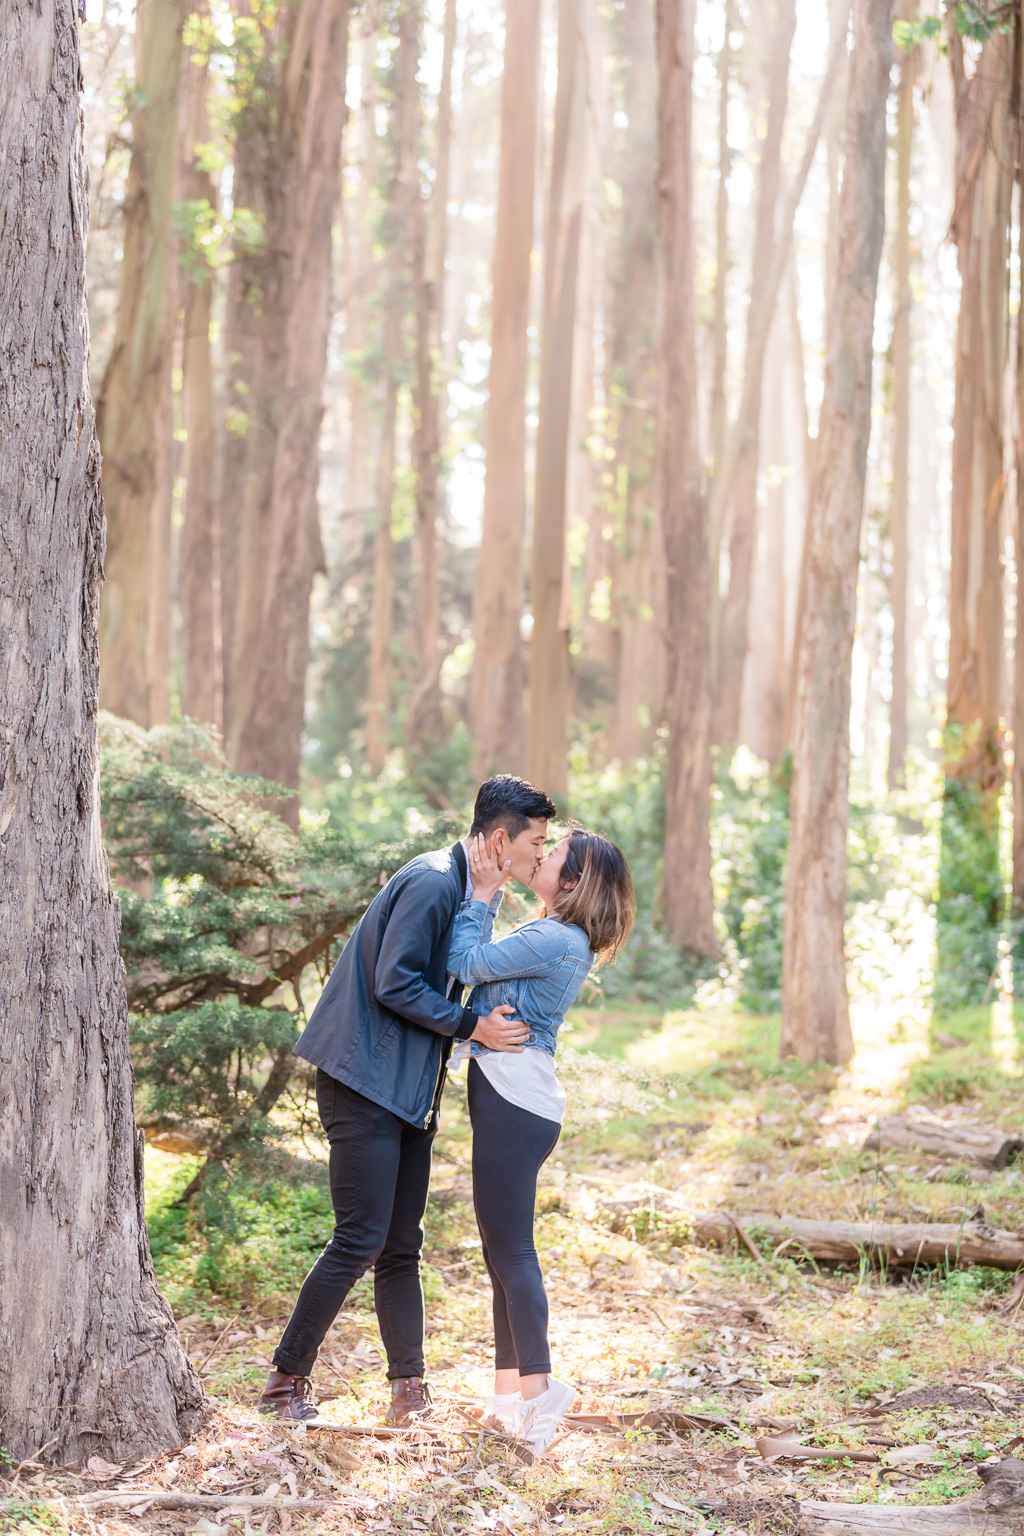 Lovers' Lane engagement photos in the woods